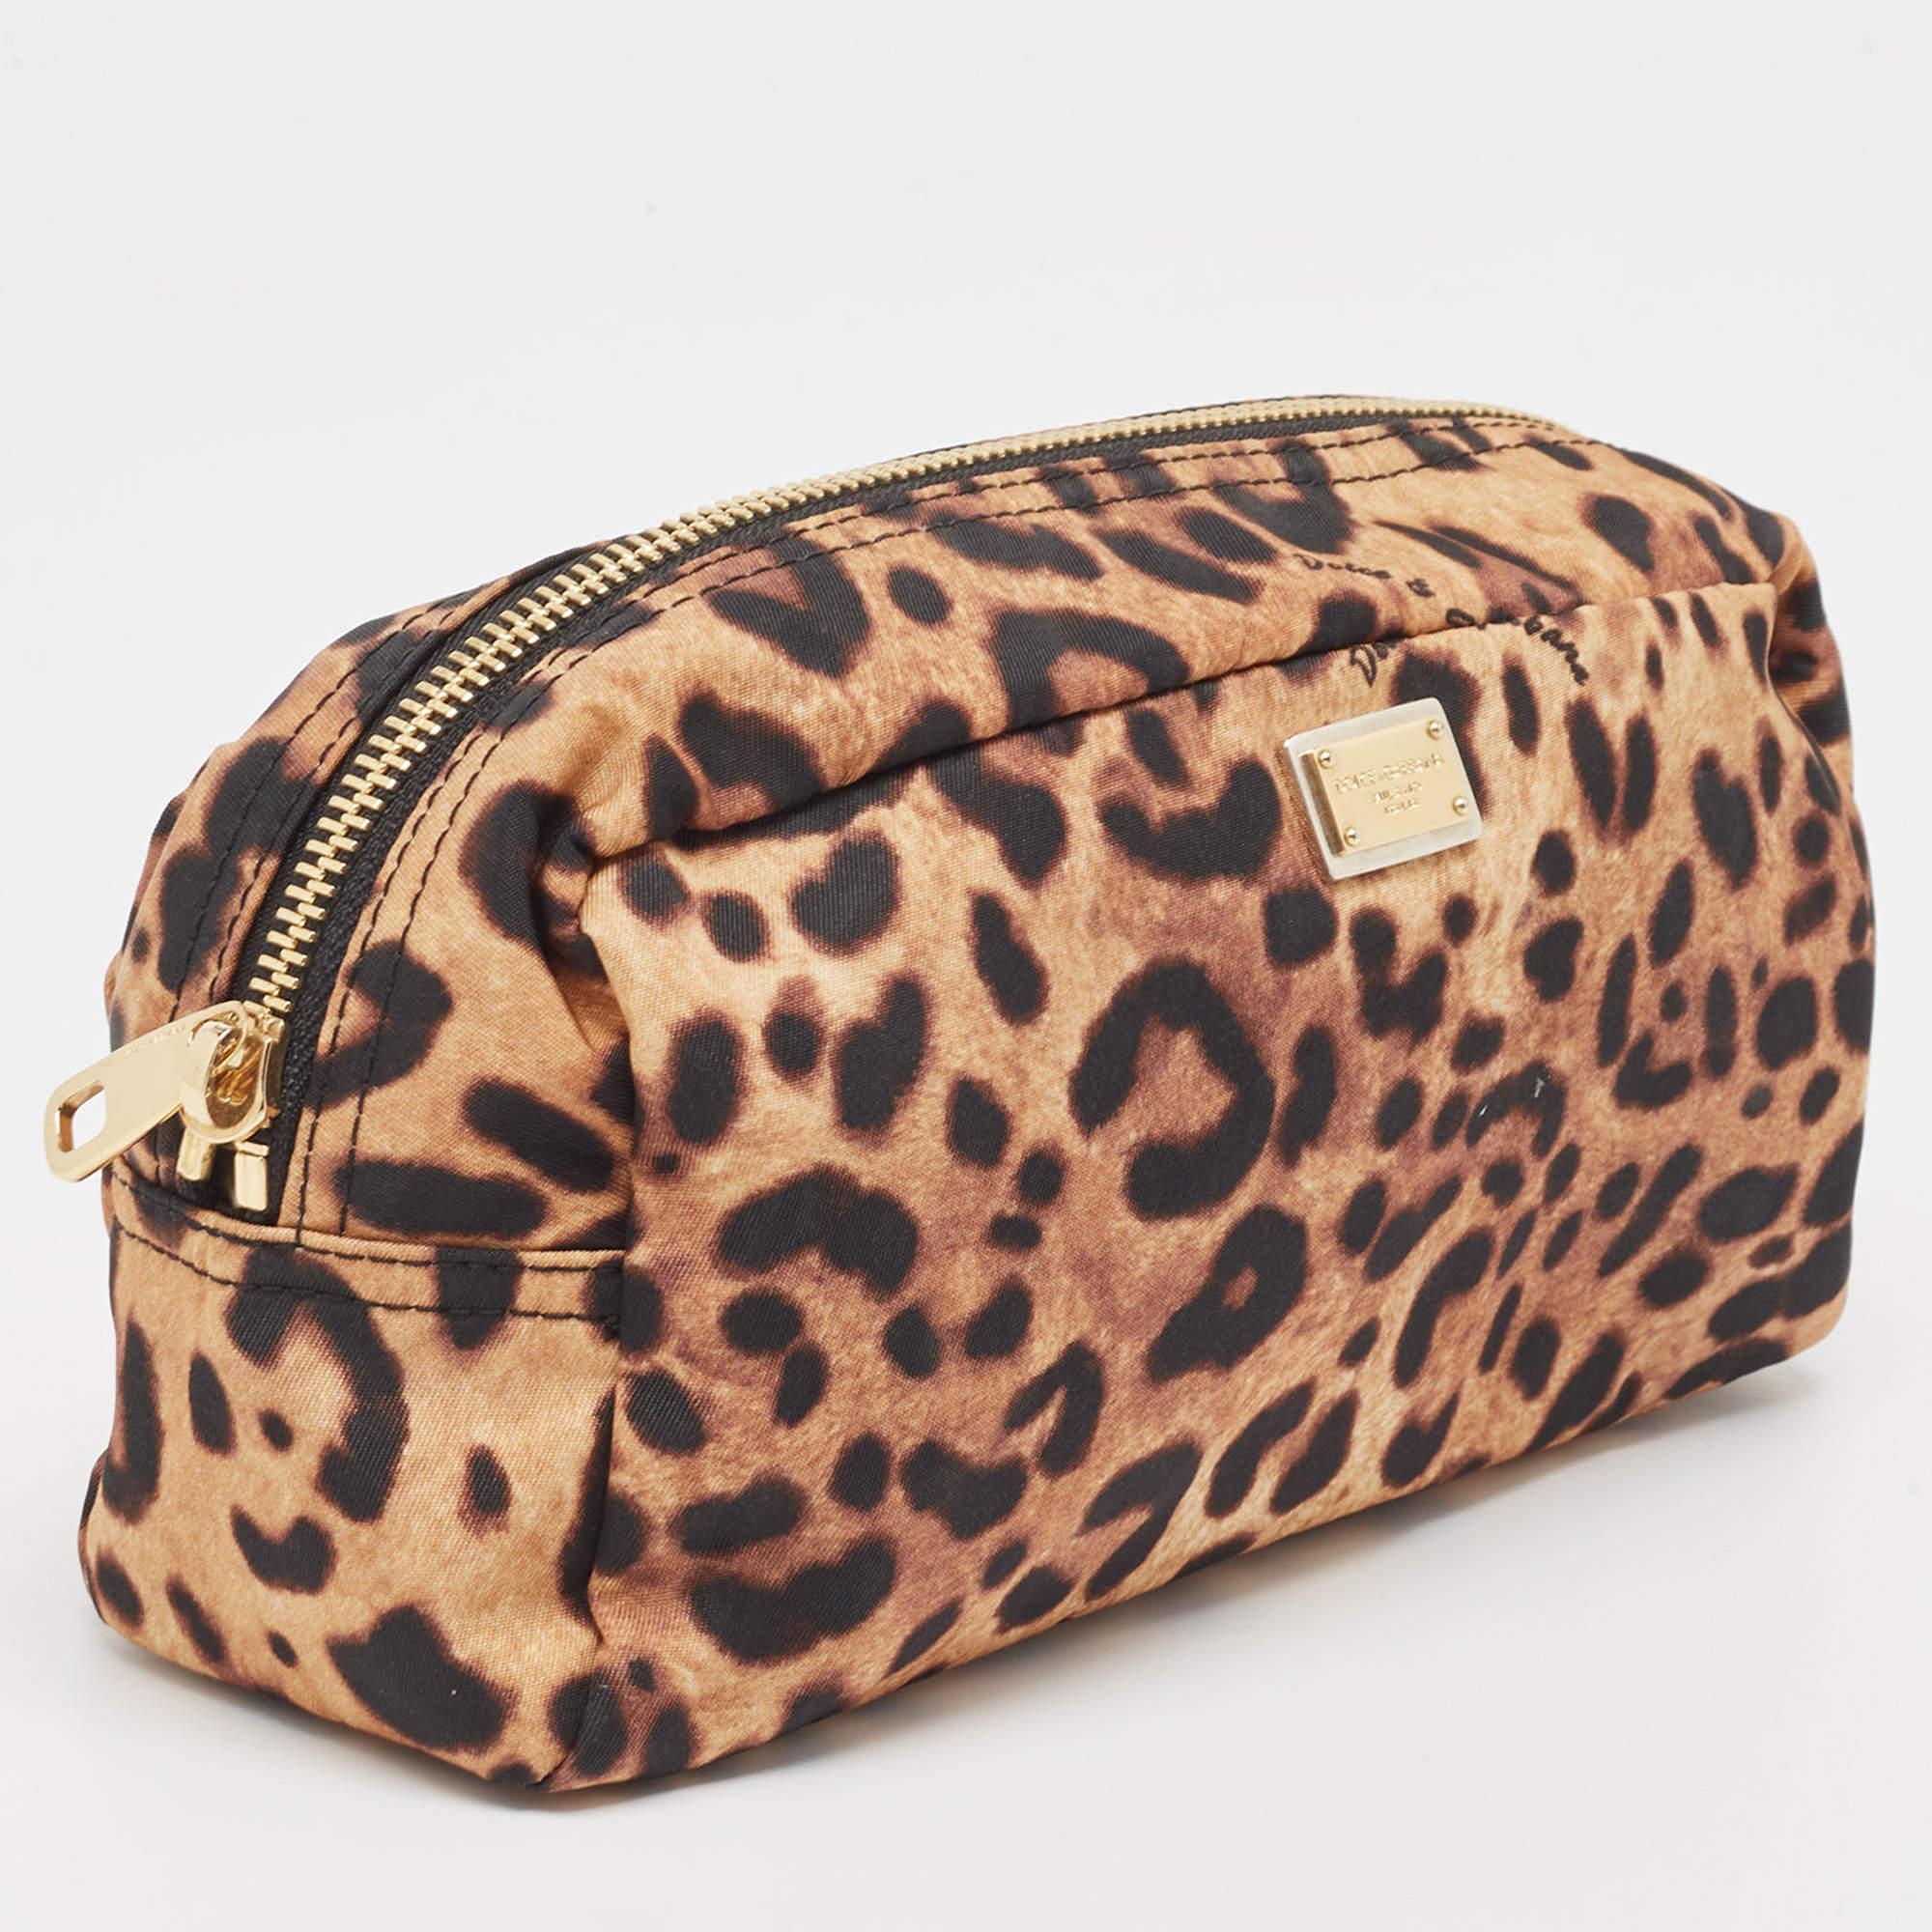 Crafted from leopard print fabric, the Dolce & Gabbana cosmetic pouch is designed to be a handy, durable accessory. The pouch has a zip-enclosed compartment and a brand accent on the front. It will easily fit into your luggage bags and travel